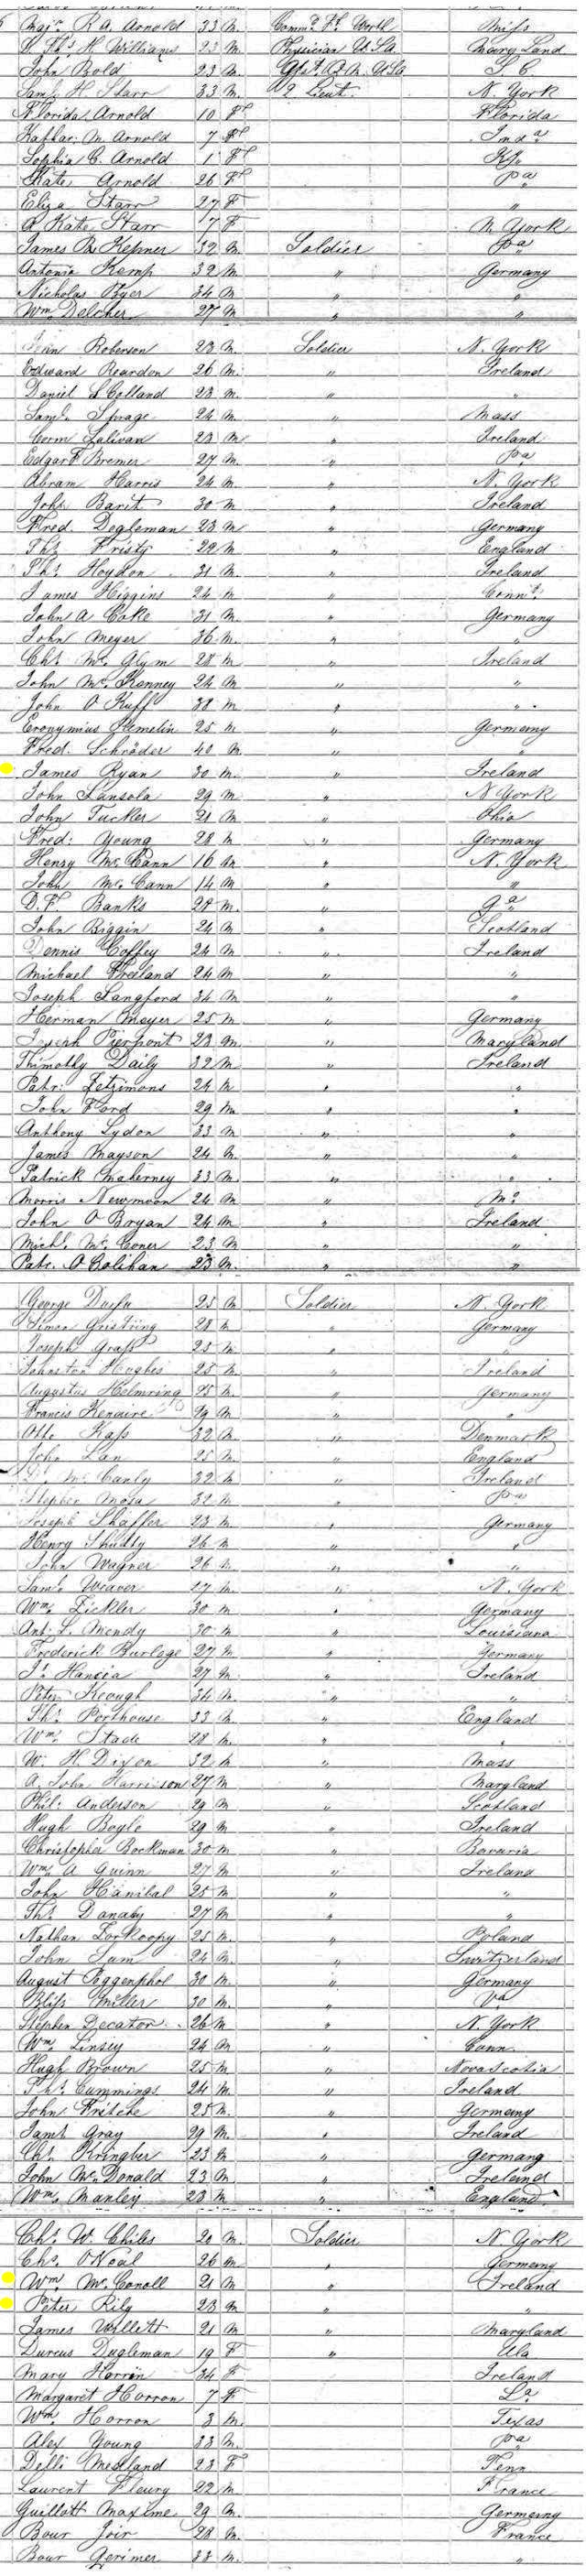 1850 census muster roll